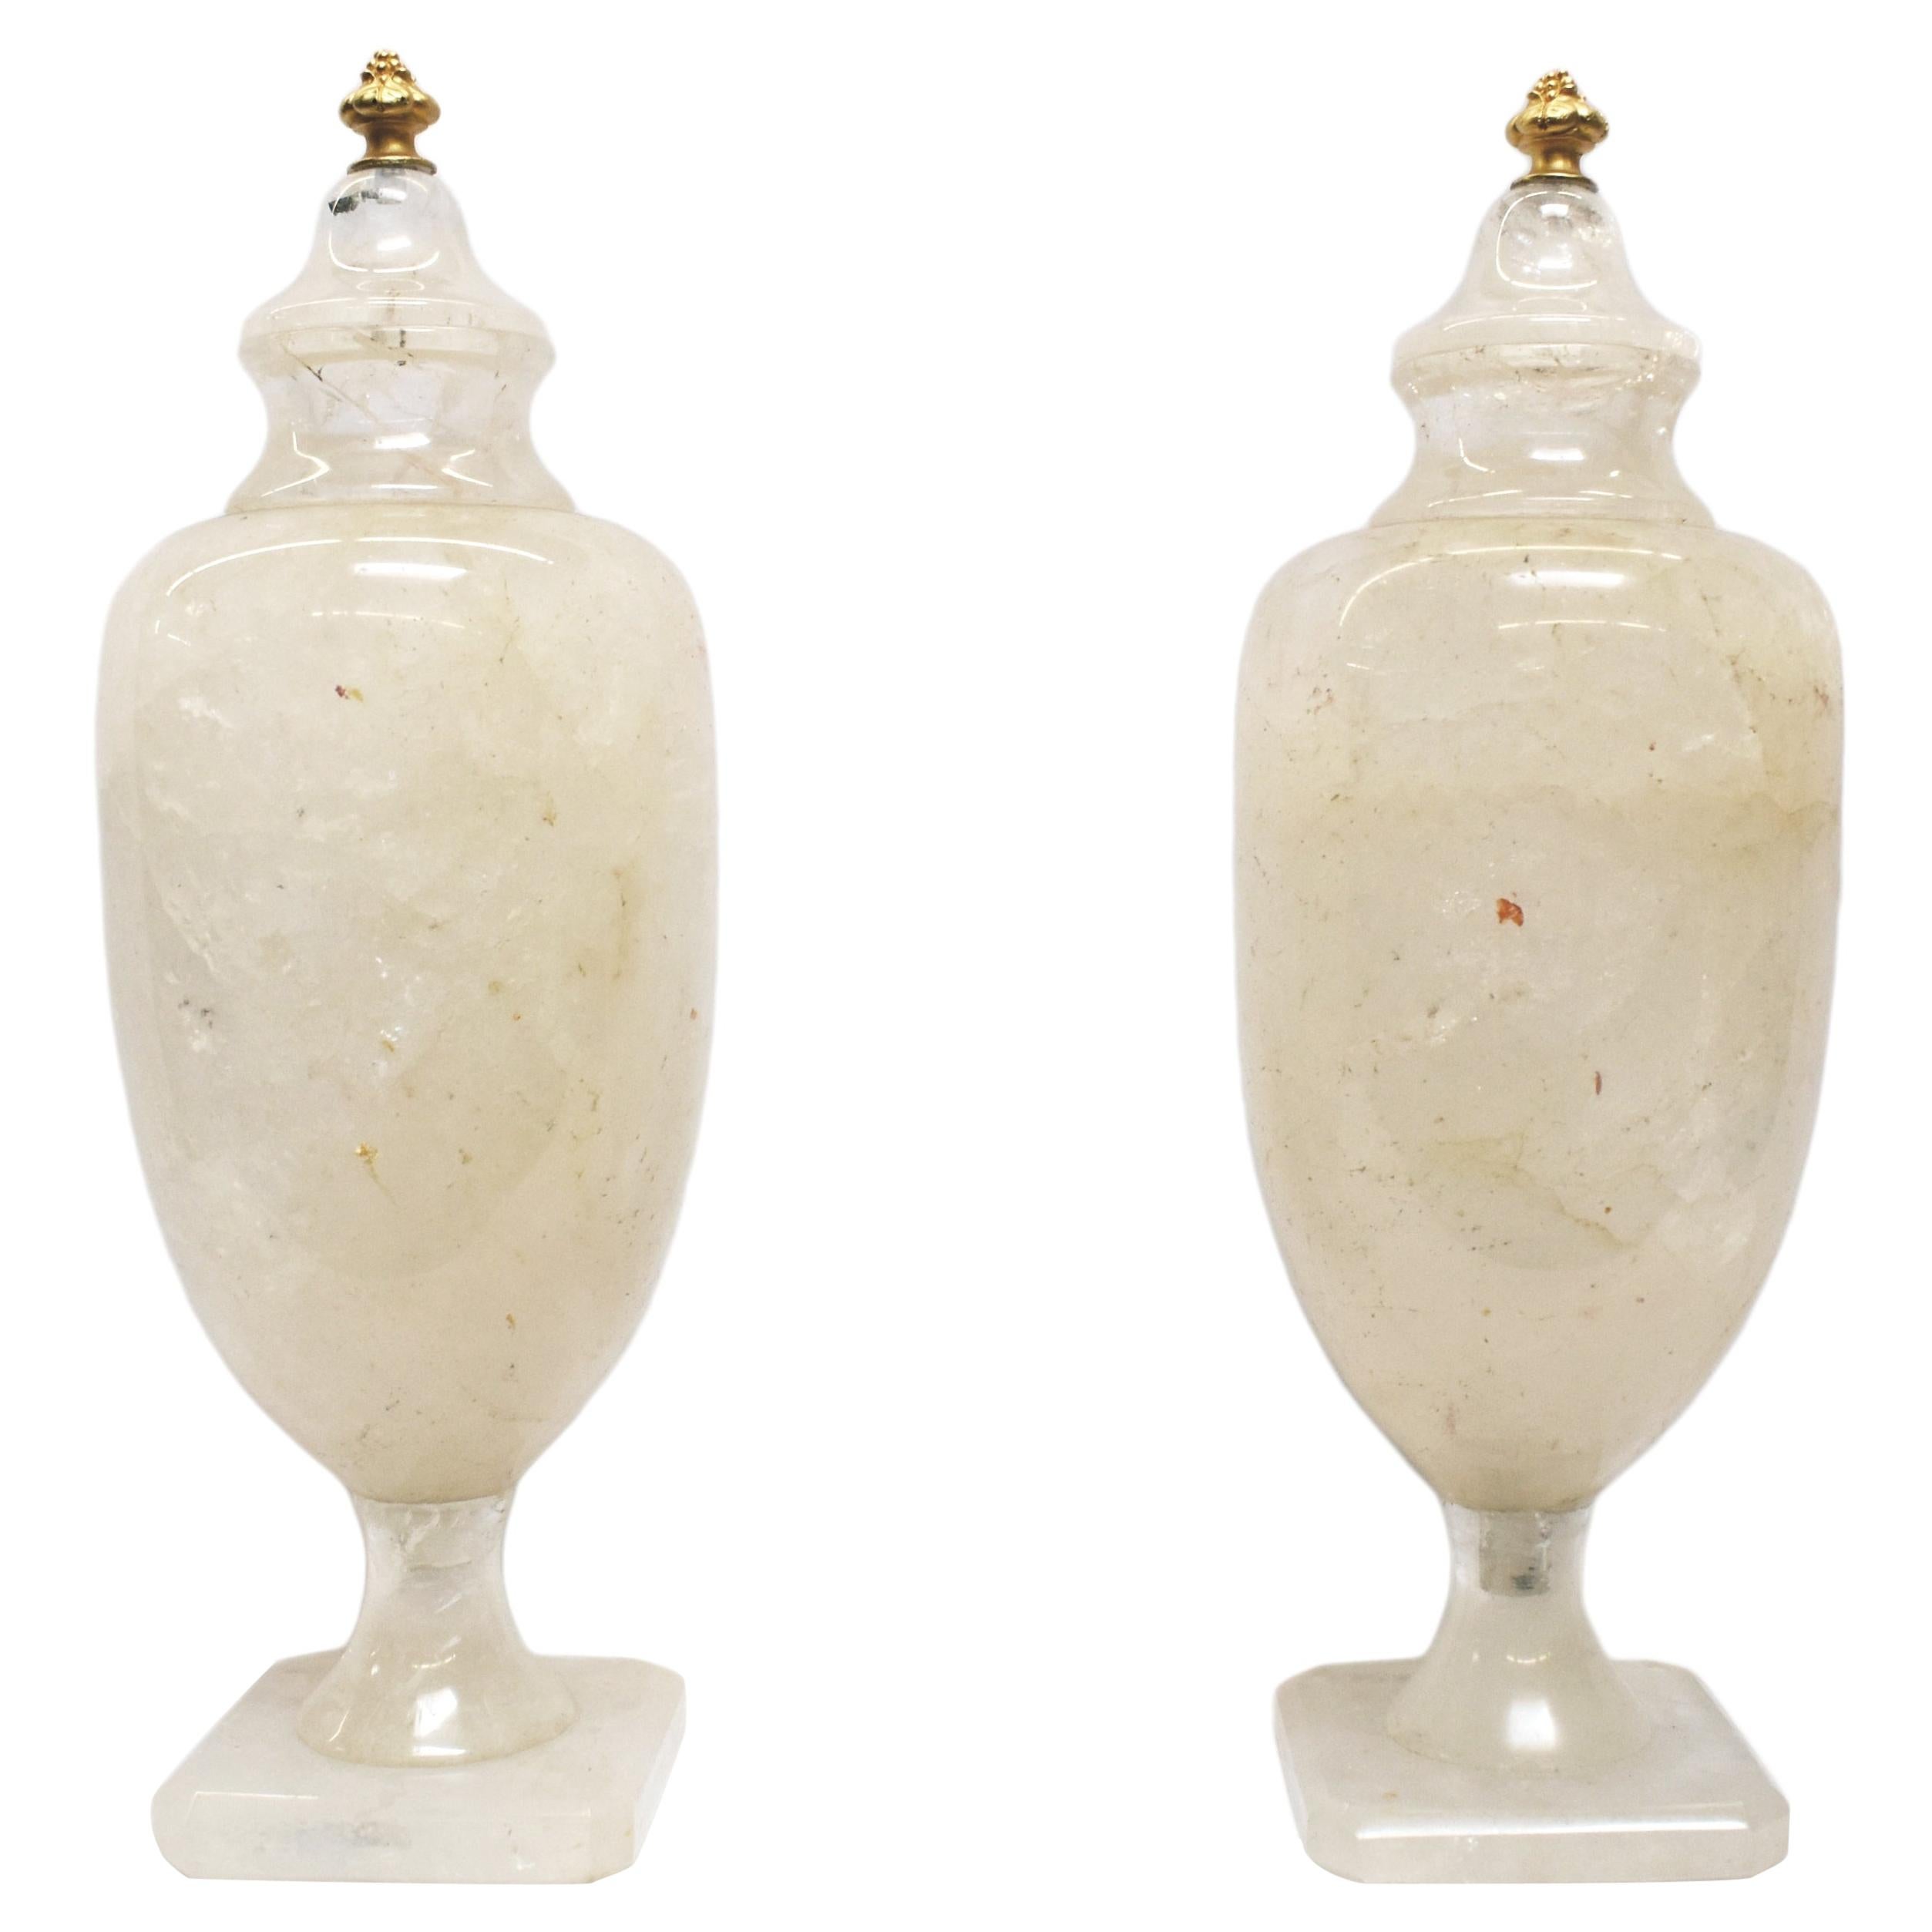 Pair of Rock Crystal Urns with Gold Finials